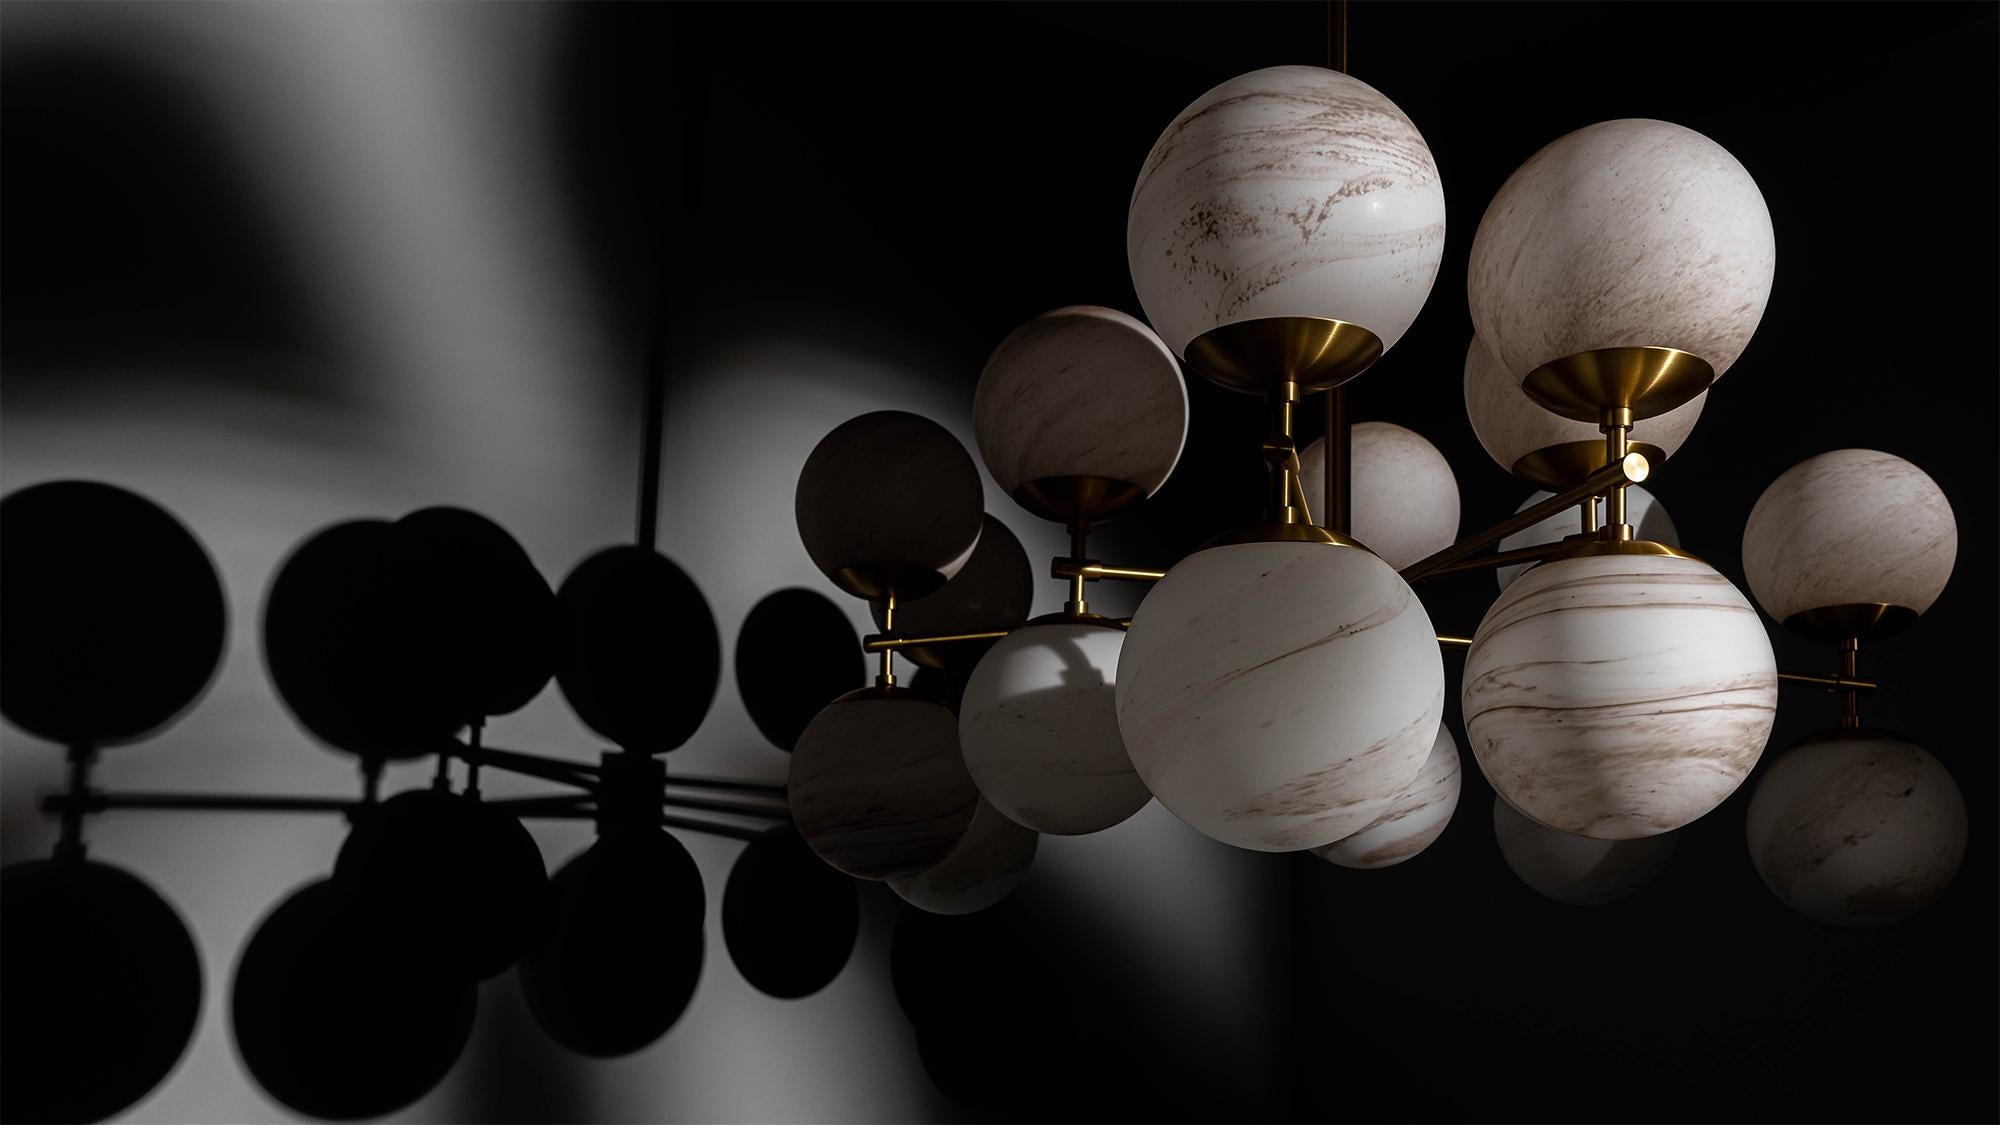 An ornamental simplicity undulates in this shape-shifting form. Globes are mirrored to create a stellar light in this gravity-defying visual constellation. Observed from various angles, Zodiac has a carousel effect with a dynamic sequence of